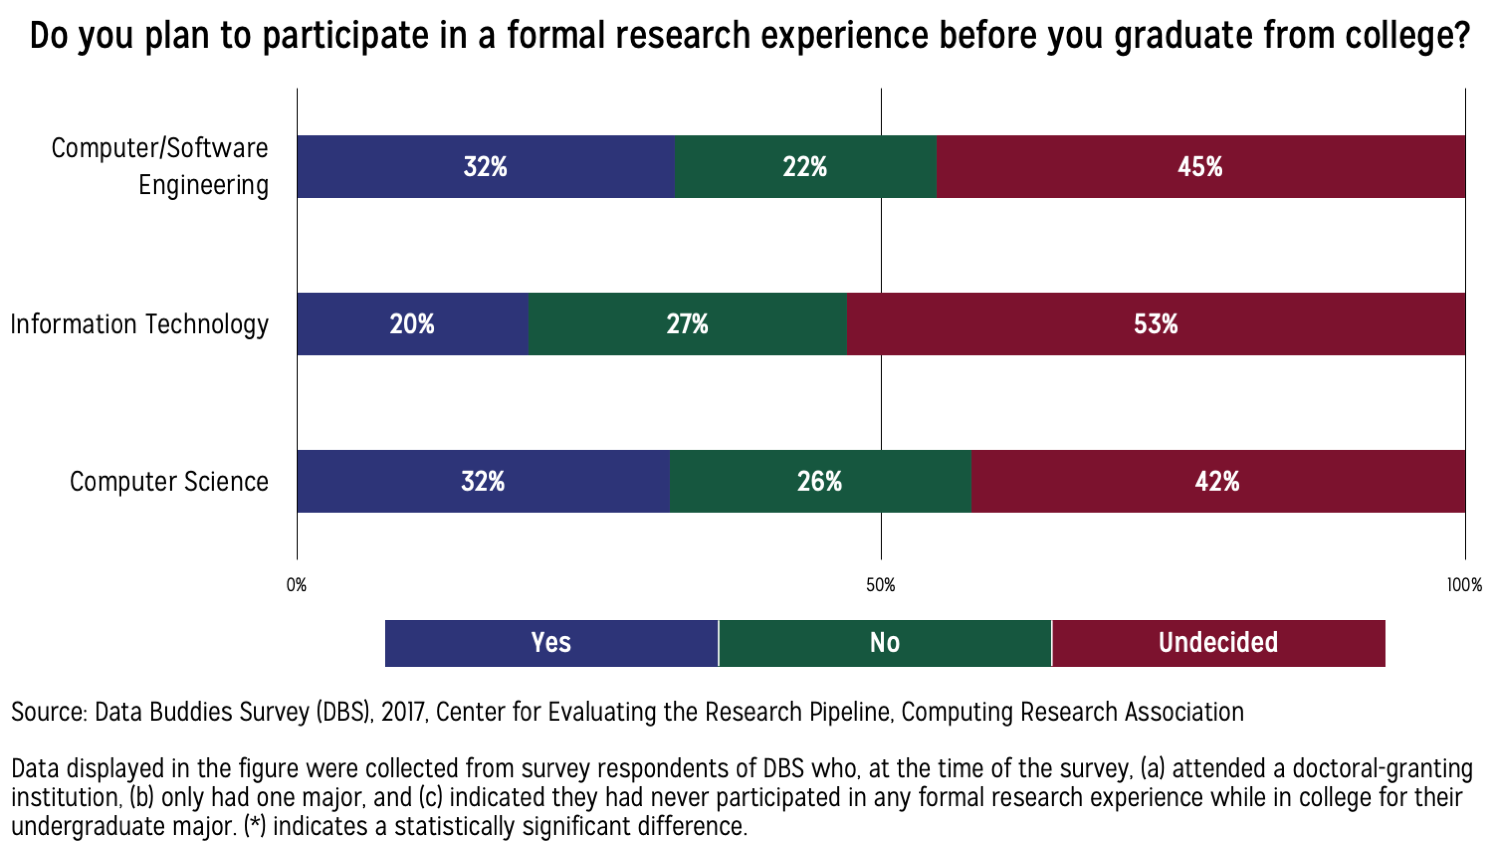 Horizontal bar graphs of CS, IT, and CSE majors at doctoral granting institutions displaying the responses to a question about plans for formal research before graduation.